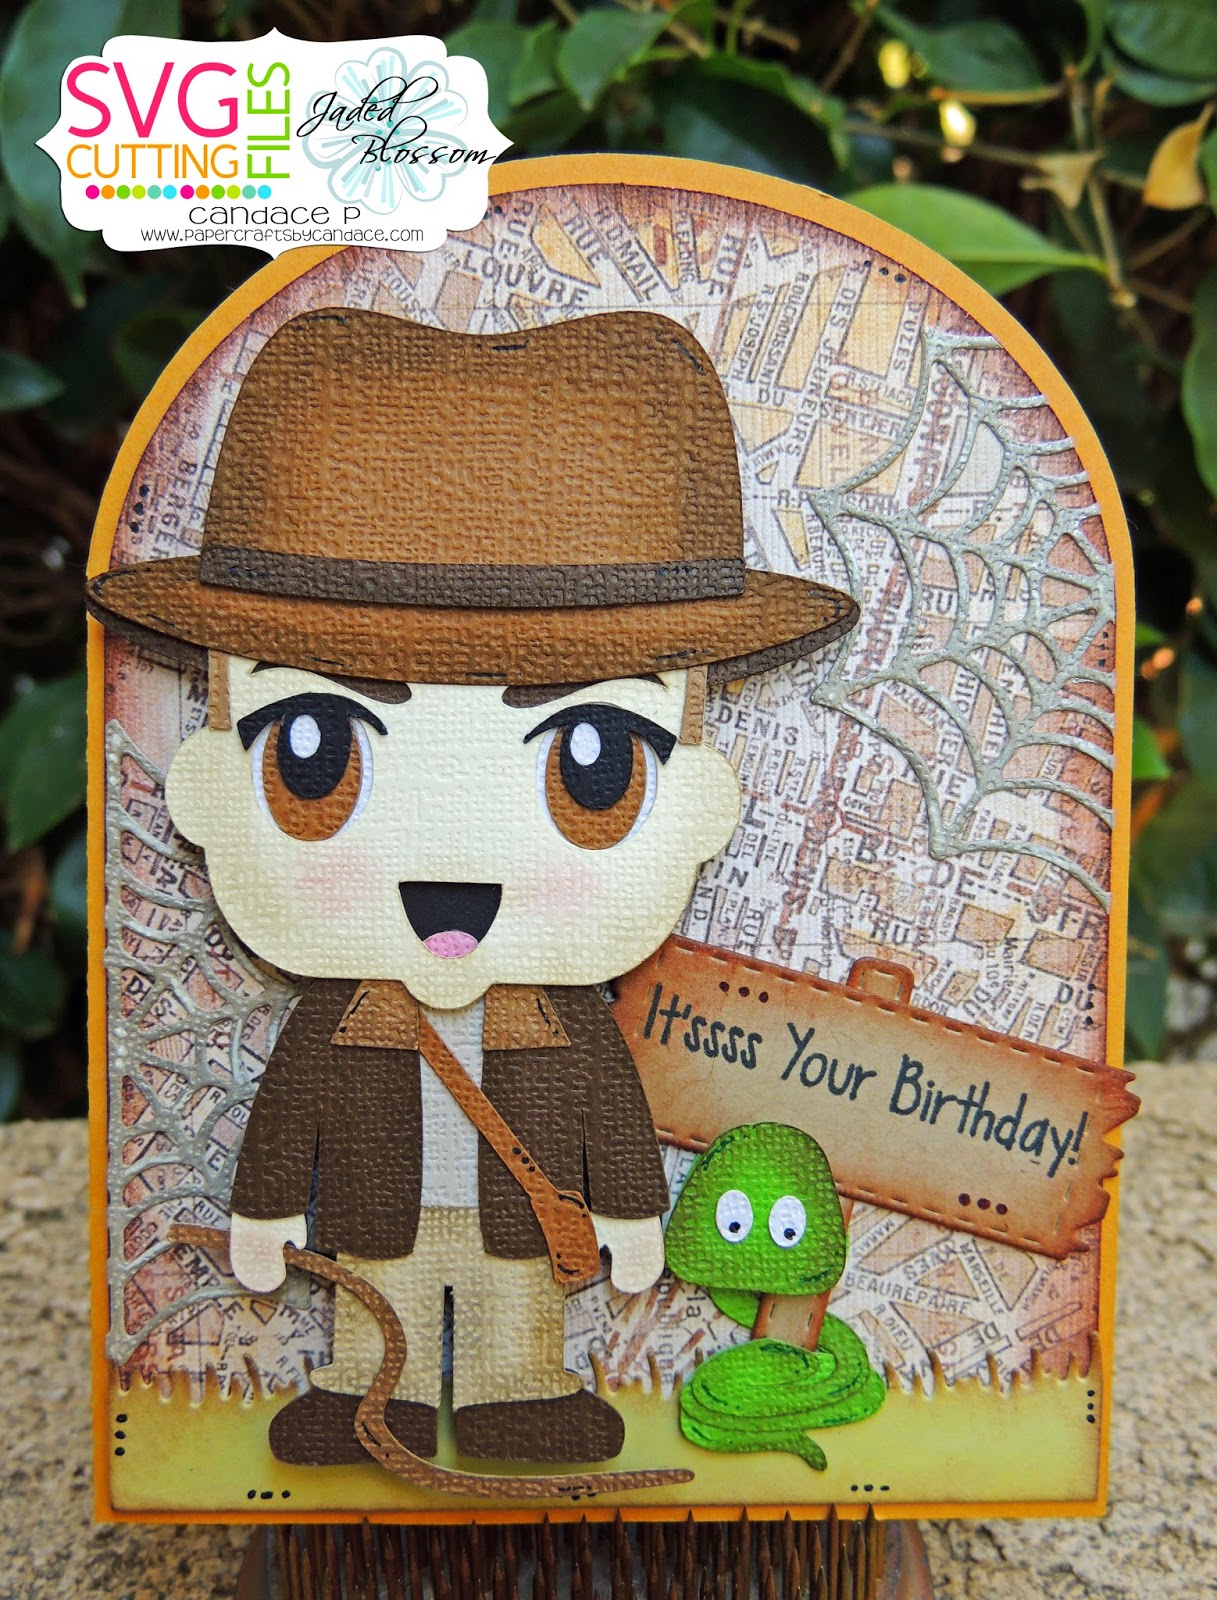 Download Paper Crafts by Candace: SVG Challenge: Birthday Cards!